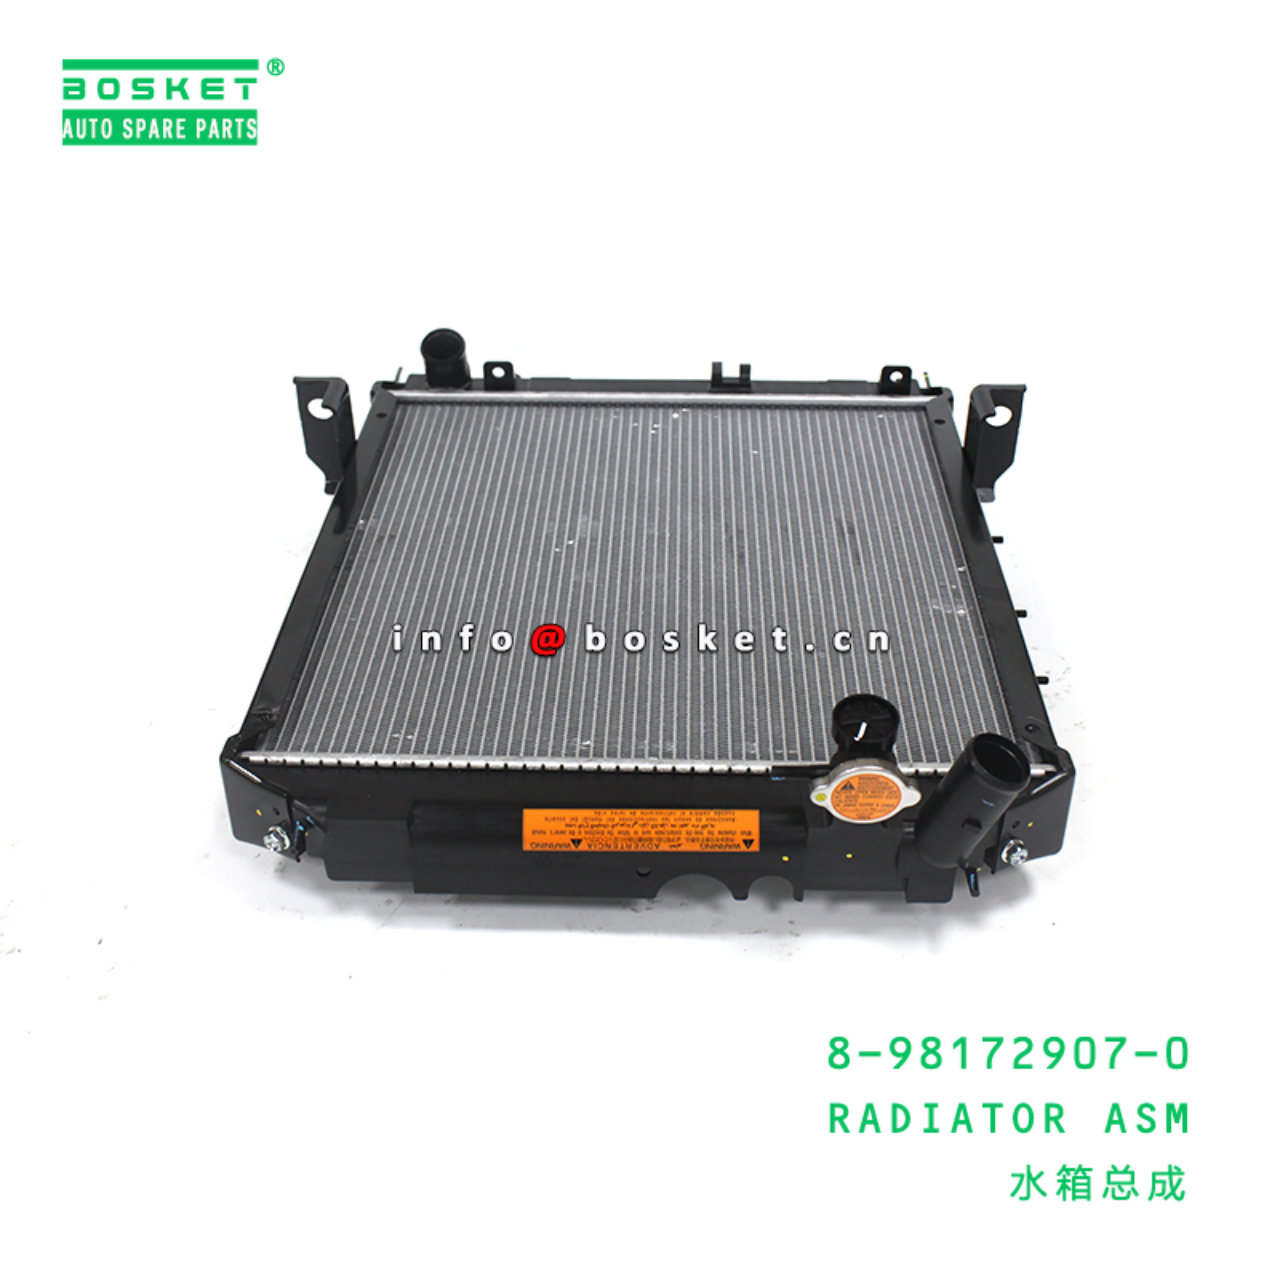 8-98172907-0 Radiator Assembly Suitable for ISUZU NLR NMR 8981729070